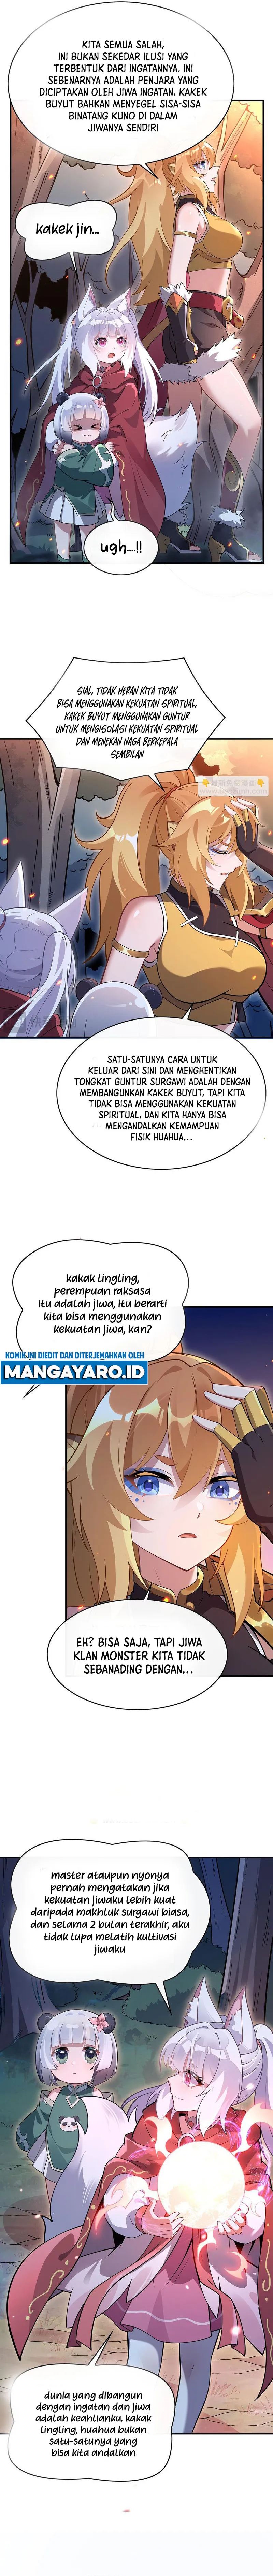 Dilarang COPAS - situs resmi www.mangacanblog.com - Komik my female apprentices are all big shots from the future 233 - chapter 233 234 Indonesia my female apprentices are all big shots from the future 233 - chapter 233 Terbaru 2|Baca Manga Komik Indonesia|Mangacan